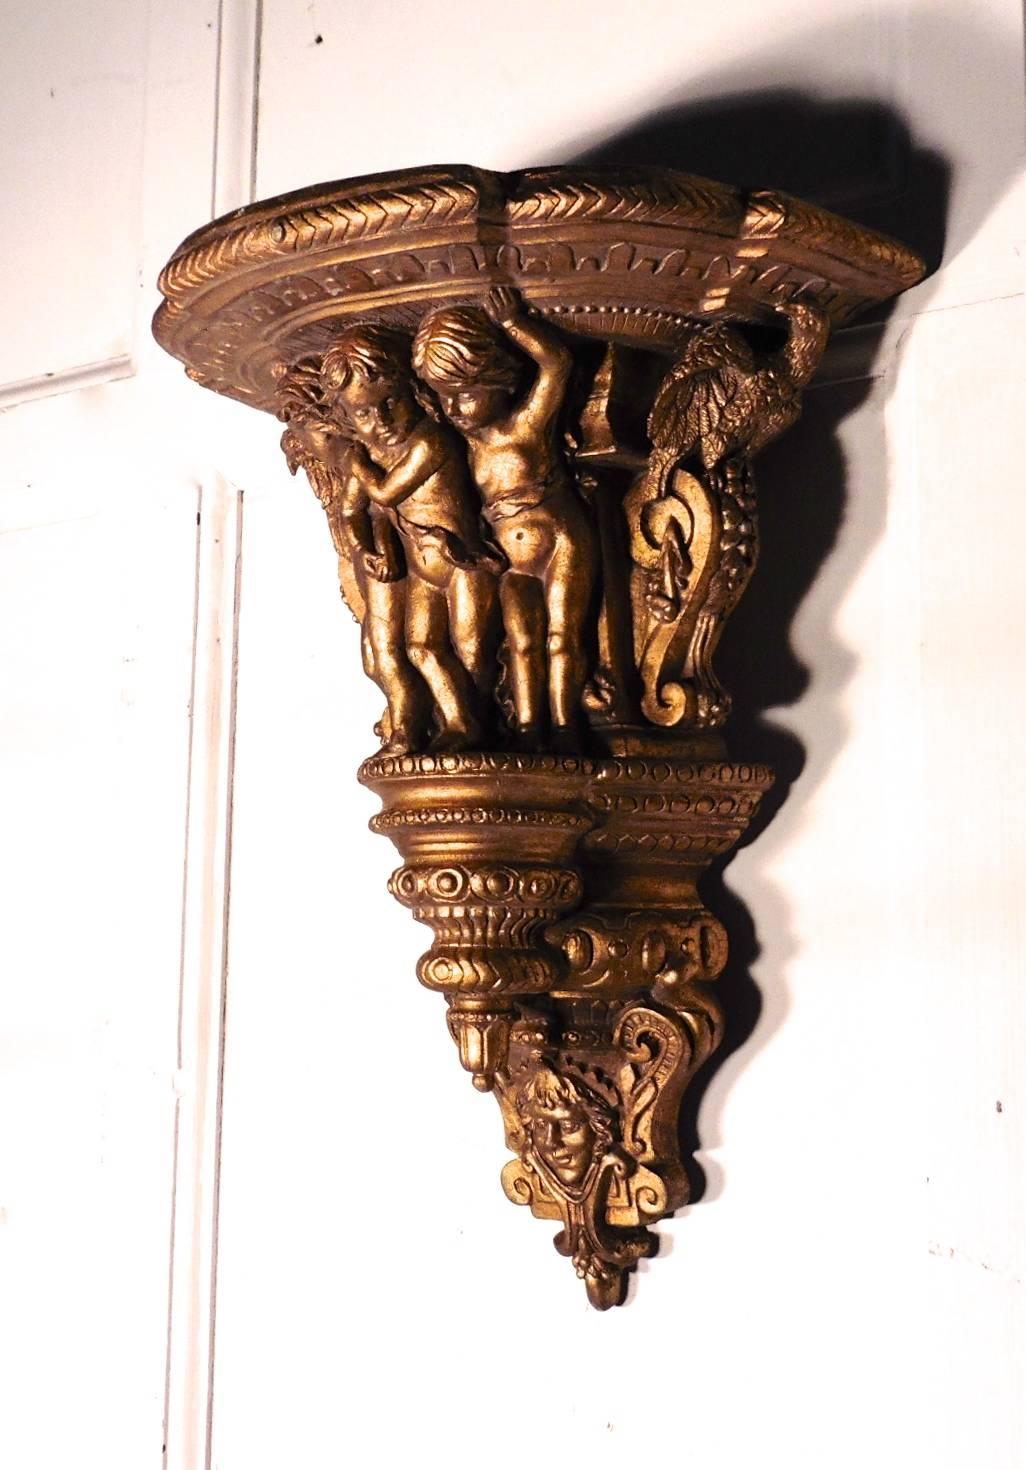 This is beautifully carved piece, depicting a three mischievous putti or cherubs with eagles on either side and a smiling face at the base, the carving is well executed and in perfect detail, the gold is somewhat darkened with age but still bright
